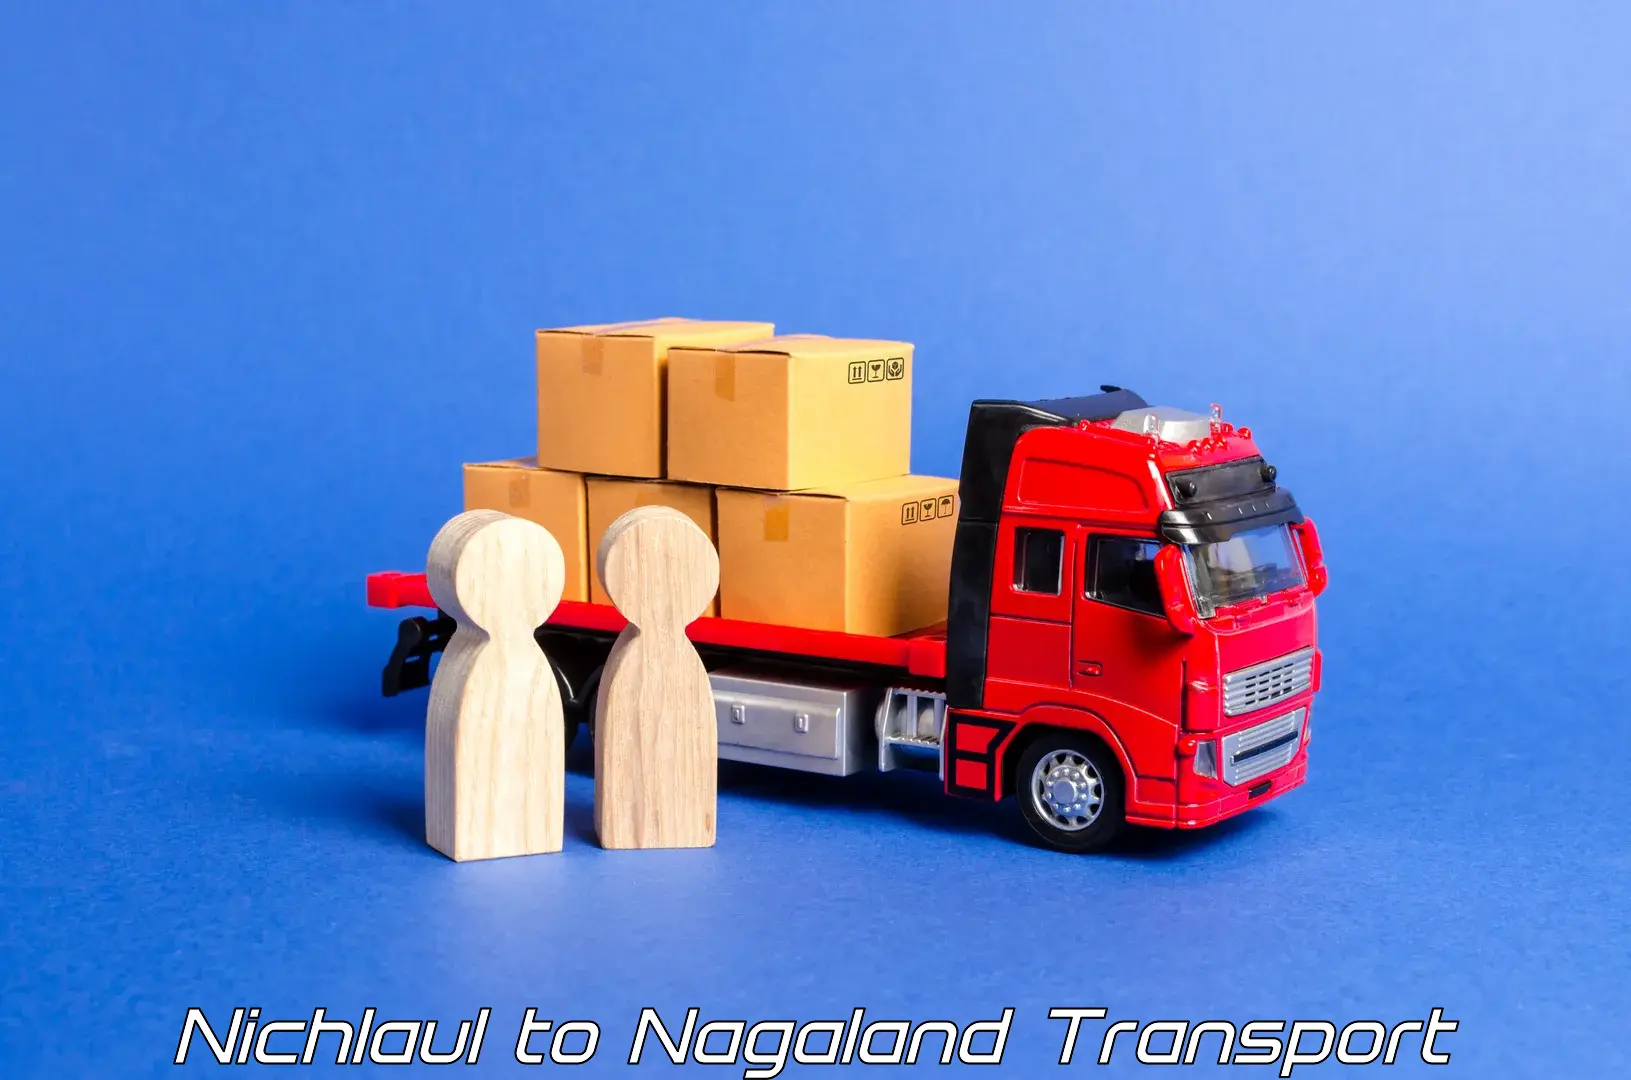 Commercial transport service Nichlaul to Peren